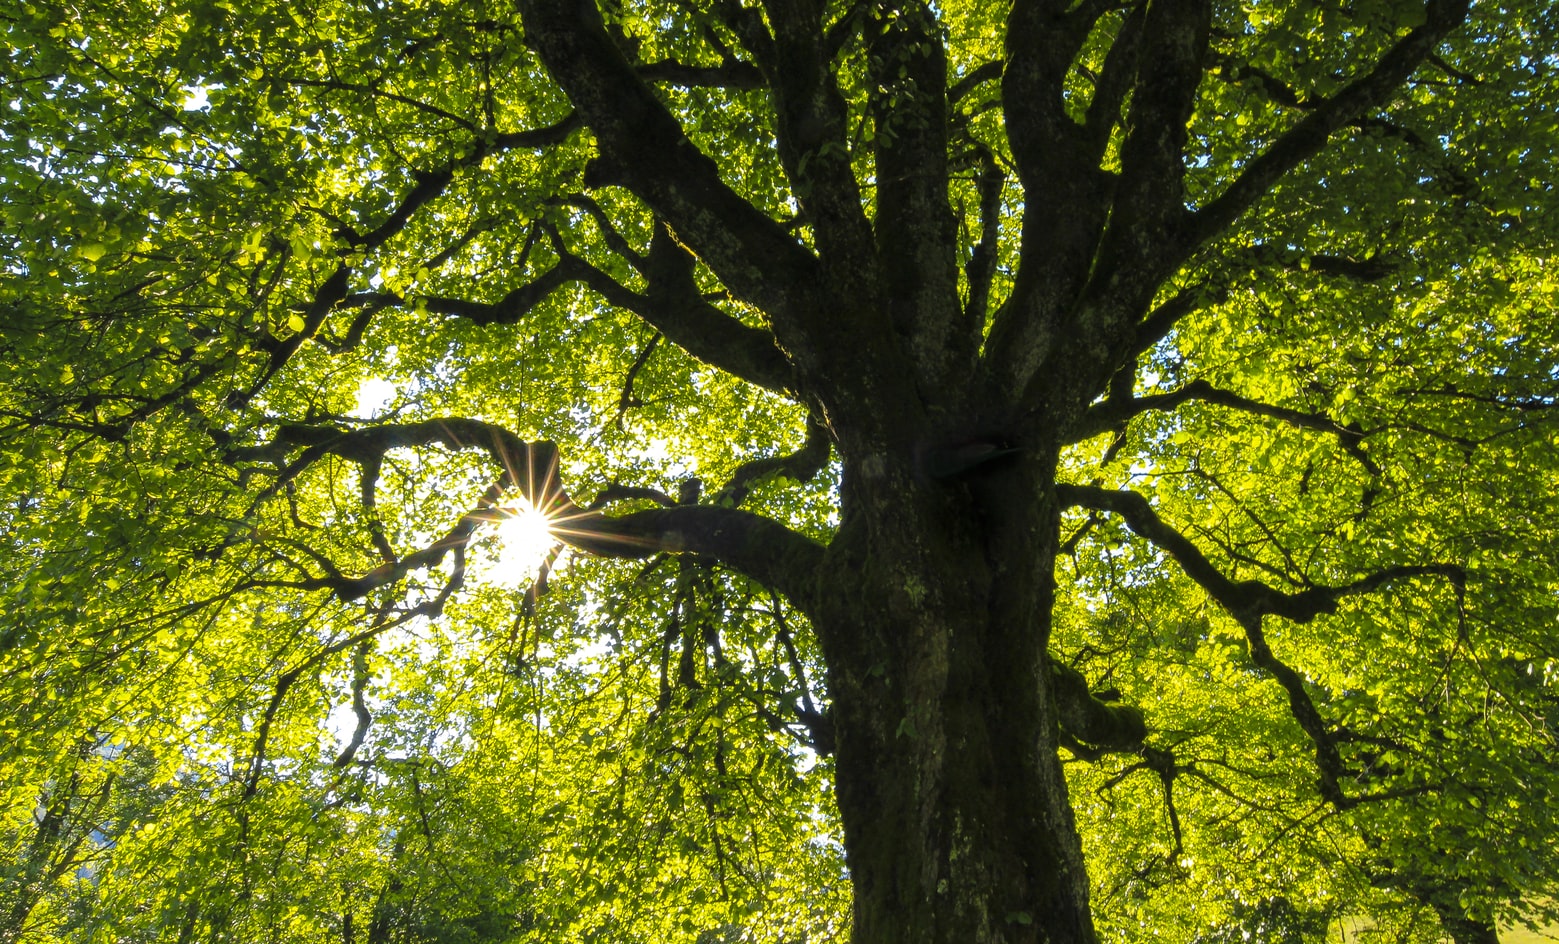 Photo taken looking up at large oak tree with bright green leaves